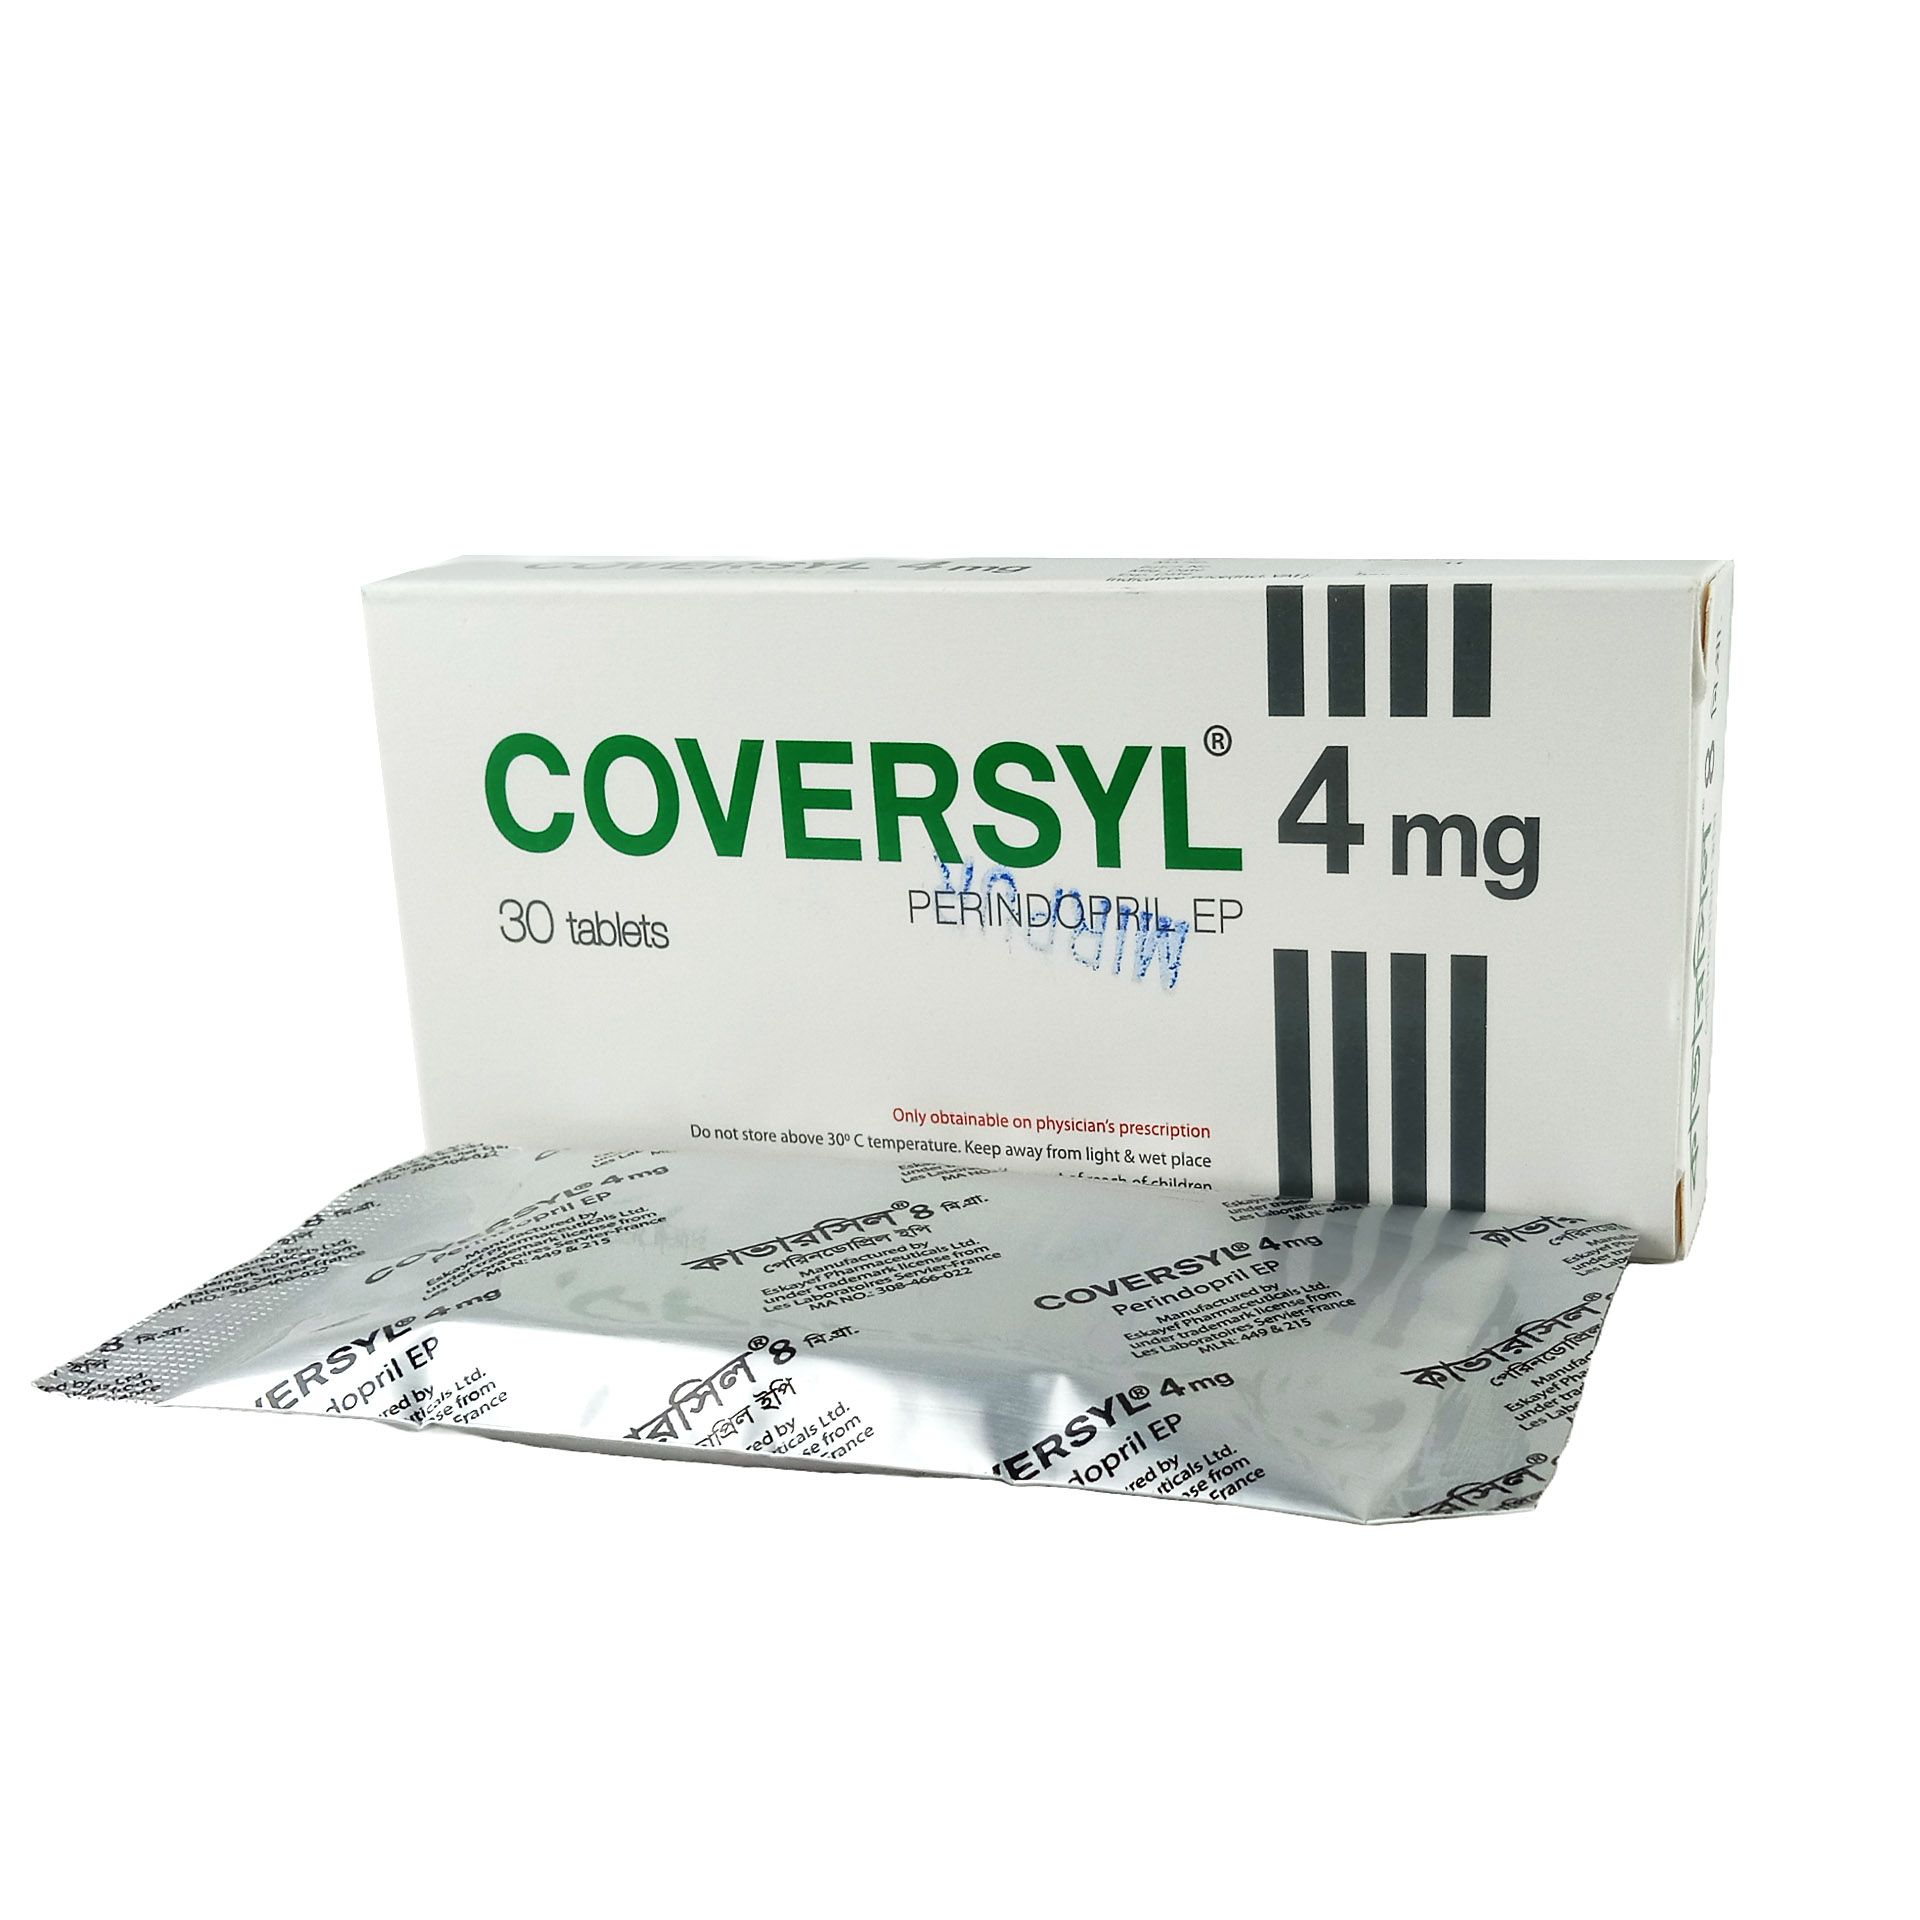 Coversyl 4mg tablet